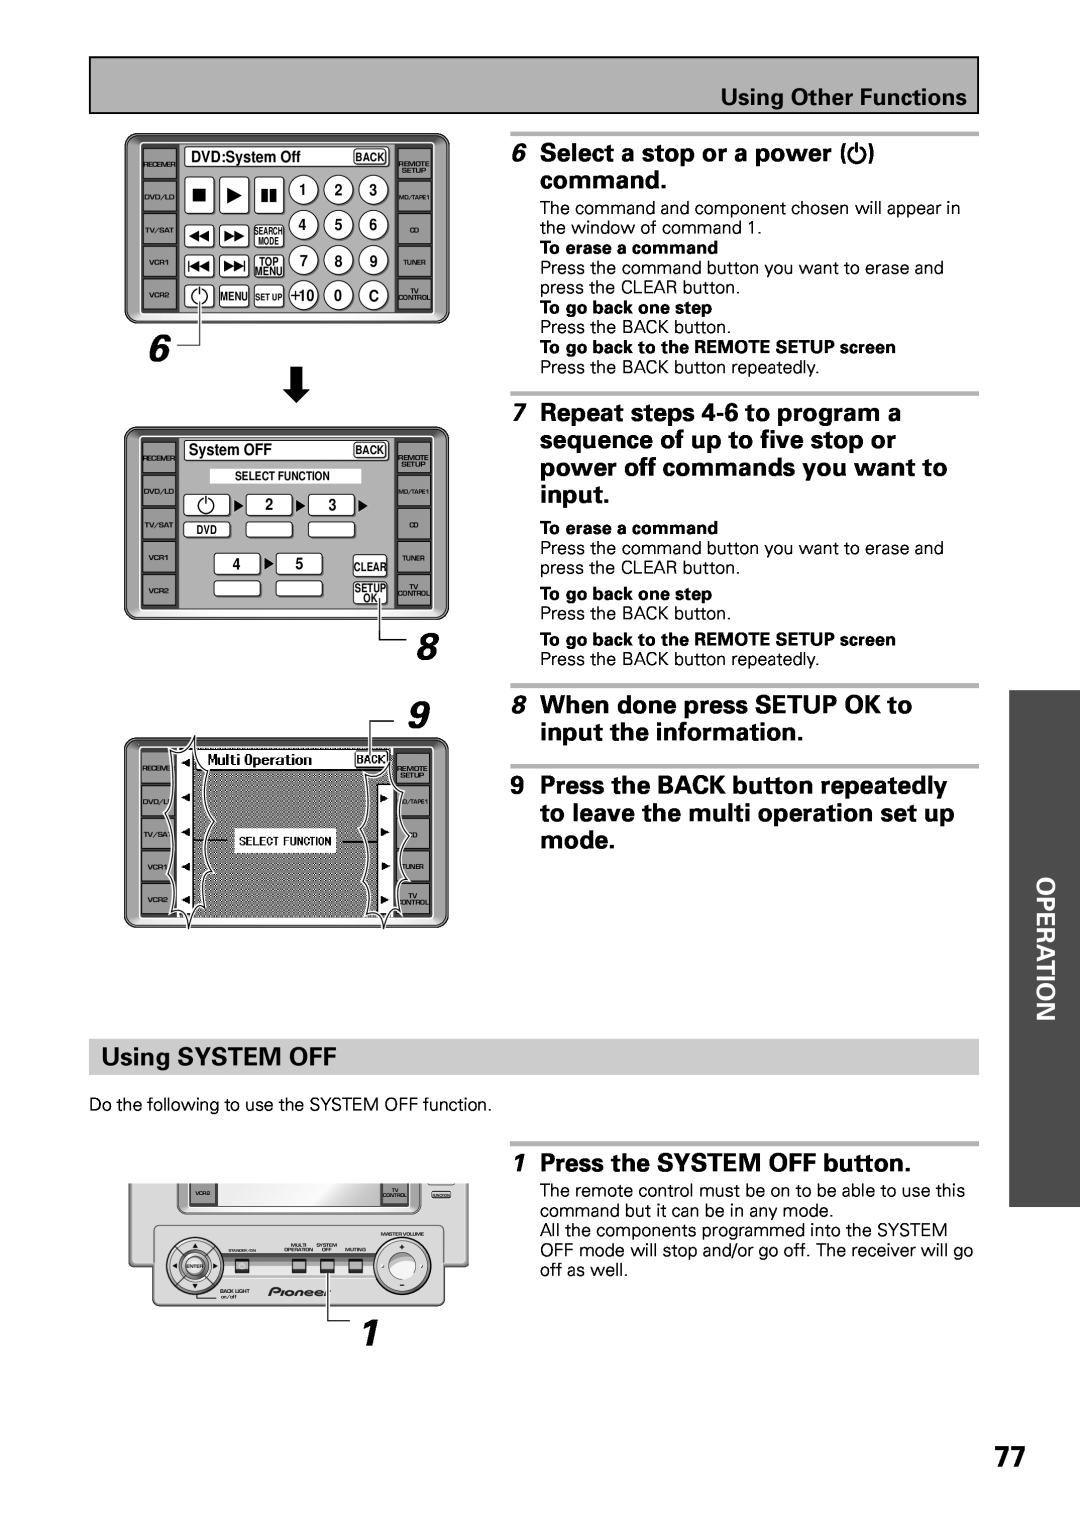 Pioneer VSX-39TX 6Select a stop or a power command, When done press SETUP OK to, input the information, Using SYSTEM OFF 